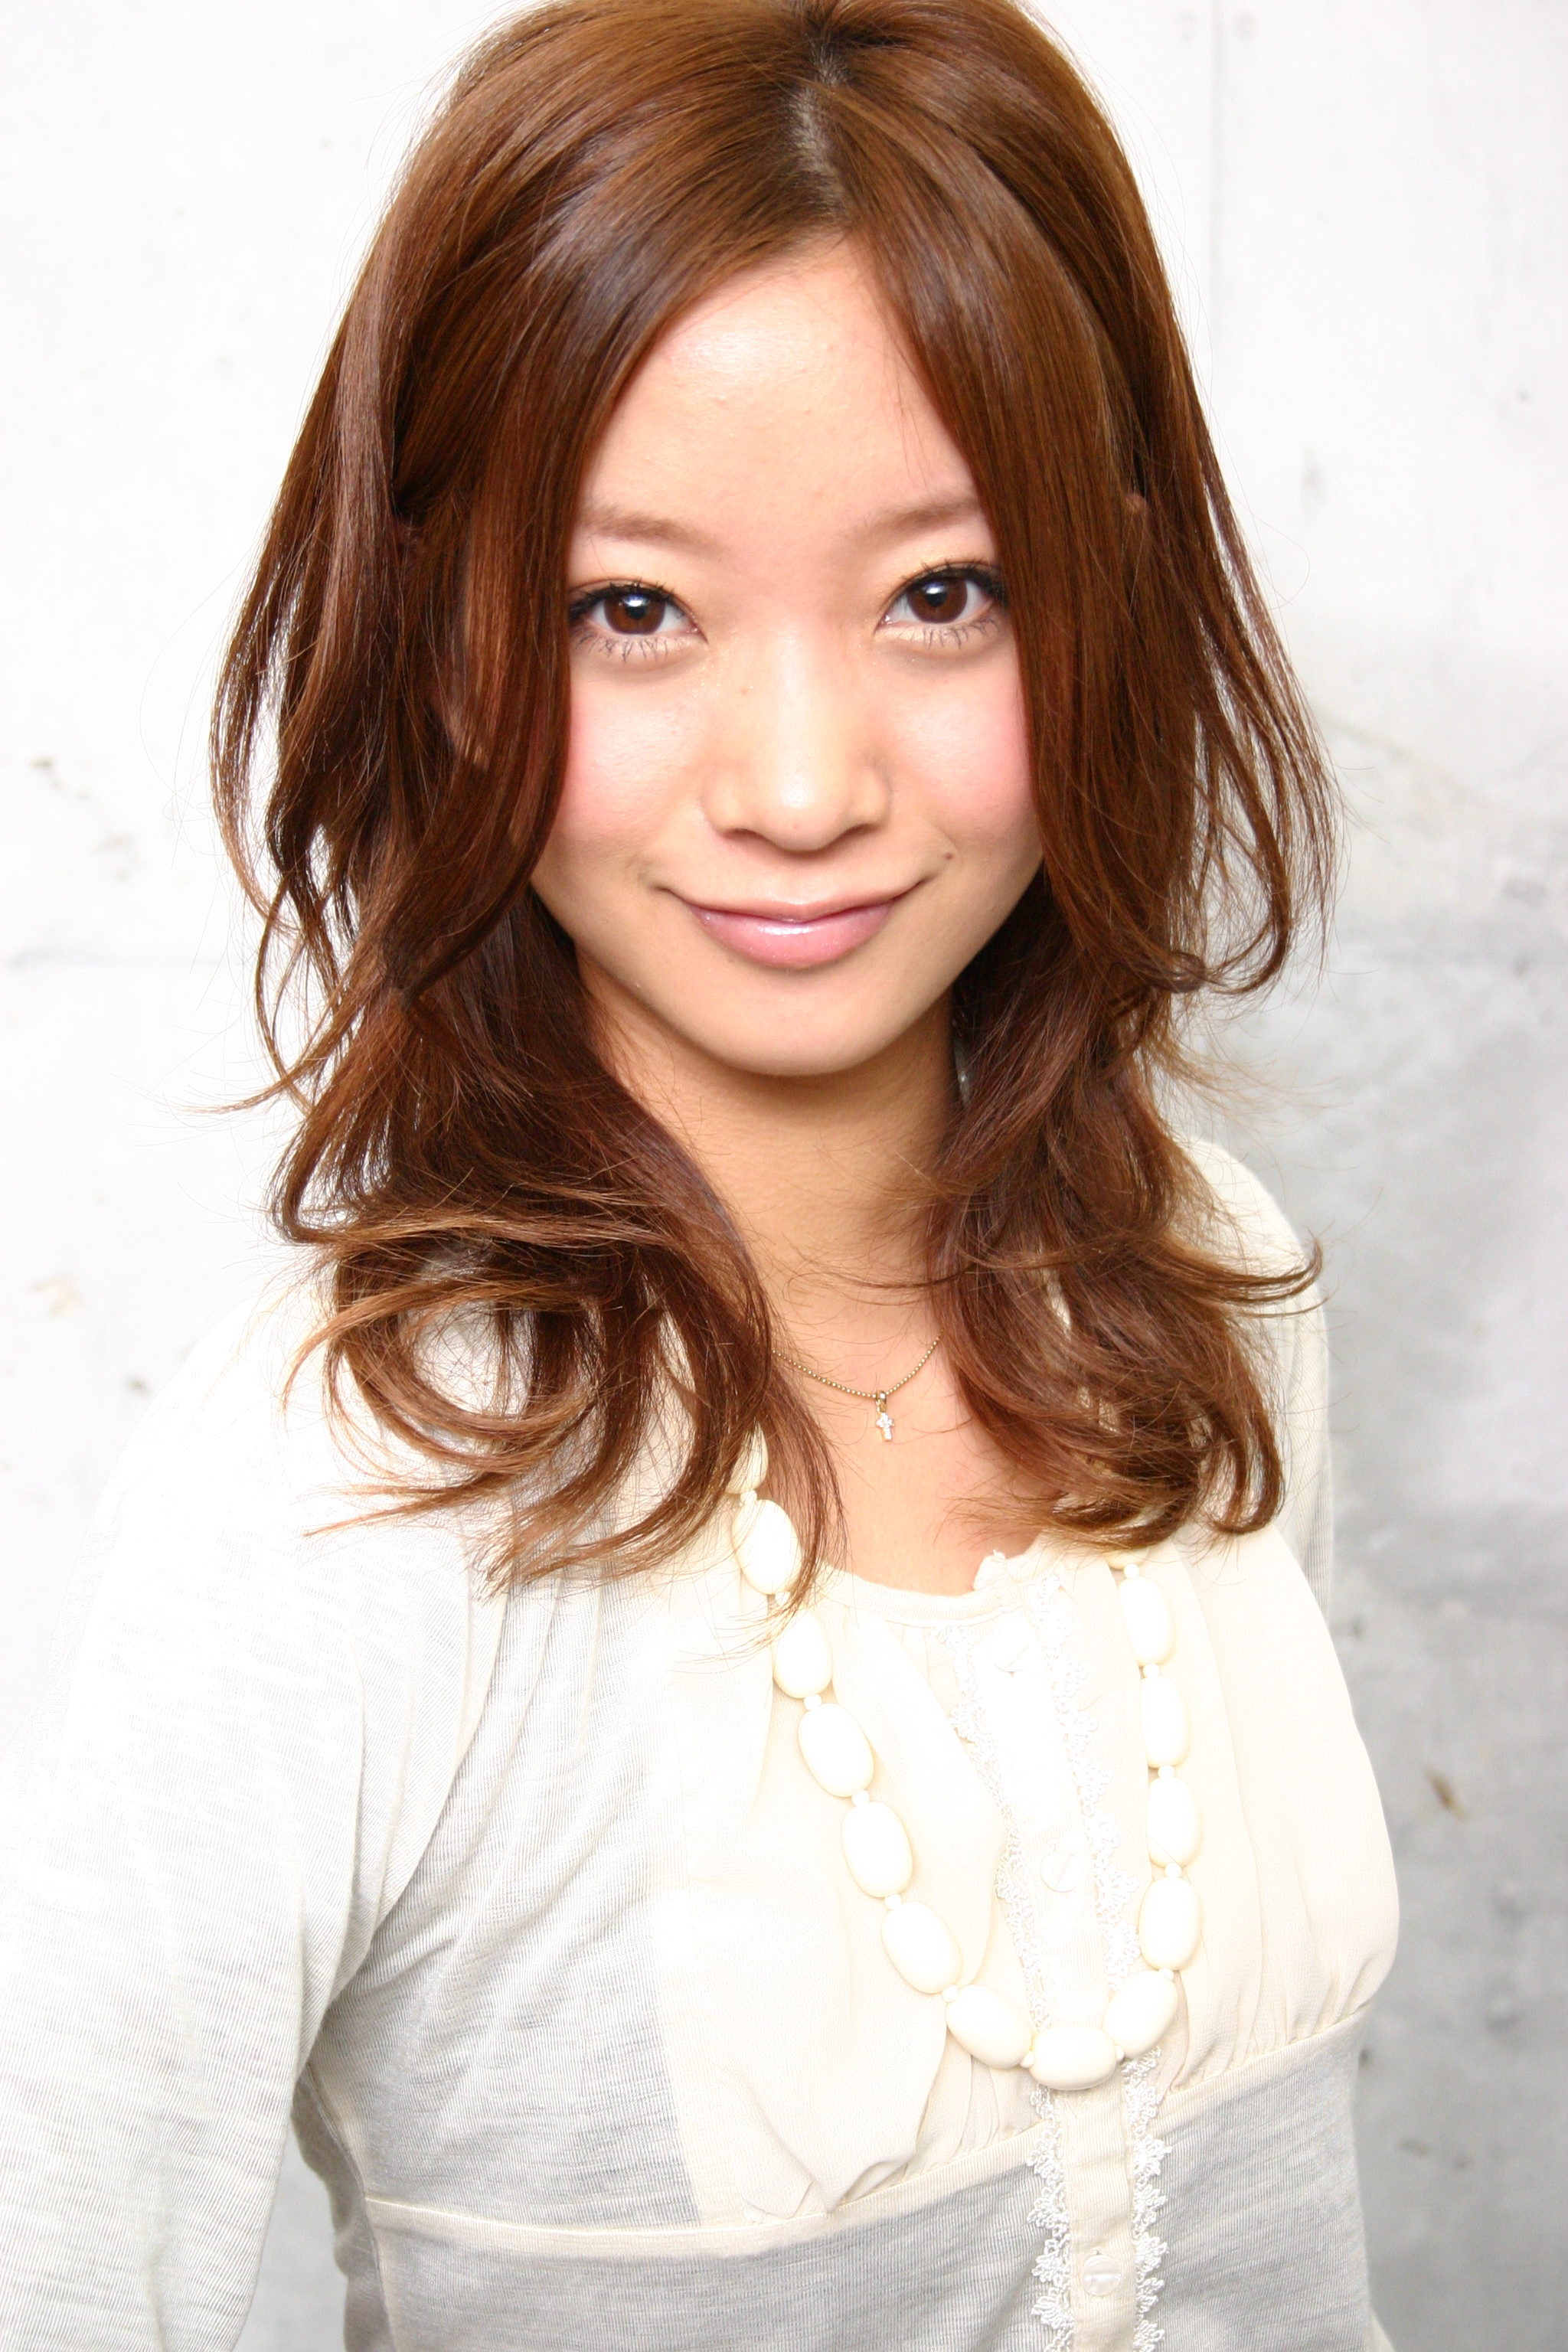 Japanese Girl Hairstyles, Long Hairstyle 2011, Hairstyle 2011, New Long Hairstyle 2011, Celebrity Long Hairstyles 2019